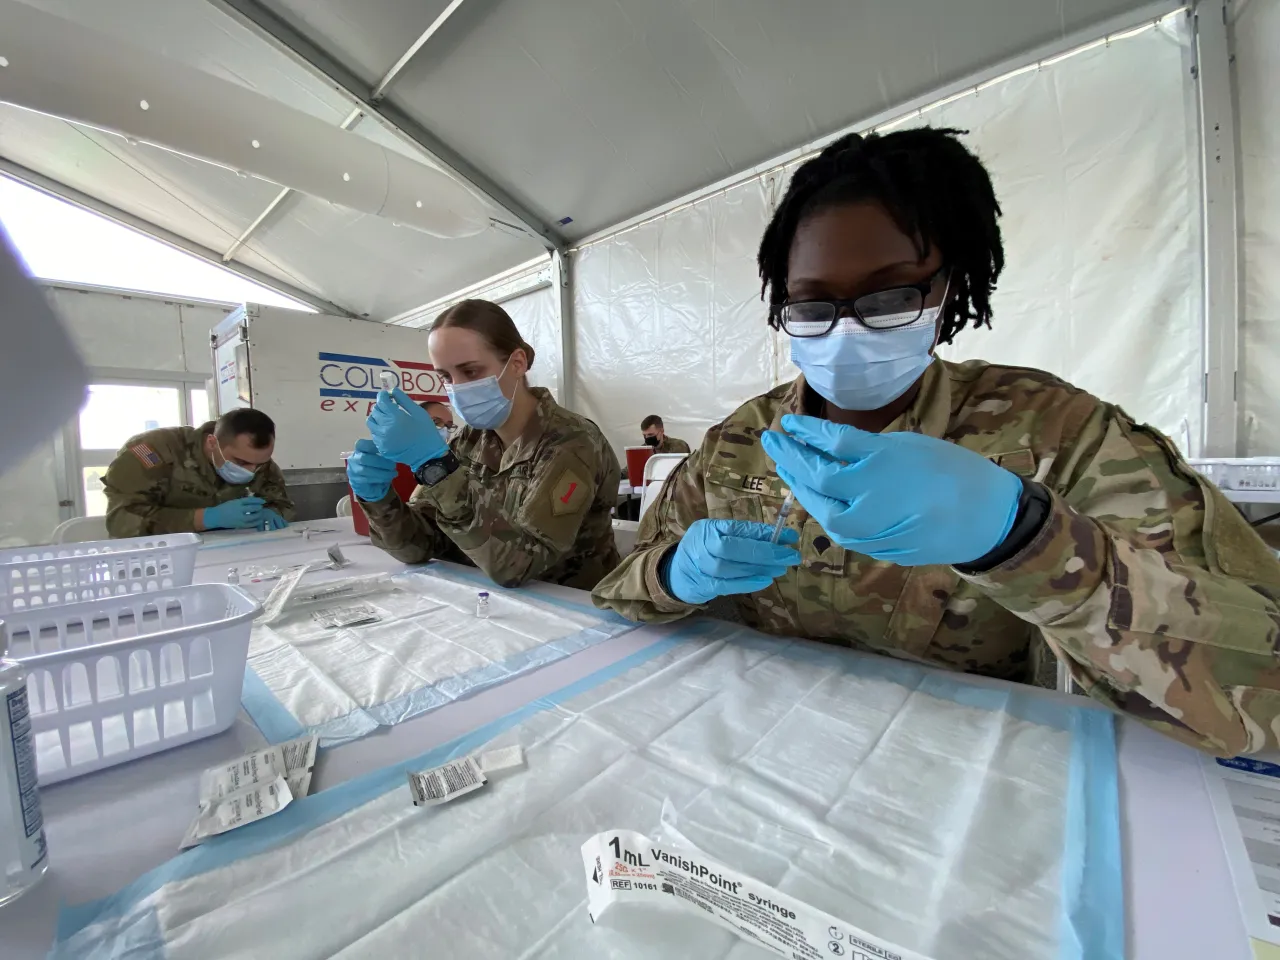 Image: Soldiers Filling COVID-19 Vaccines in Miami